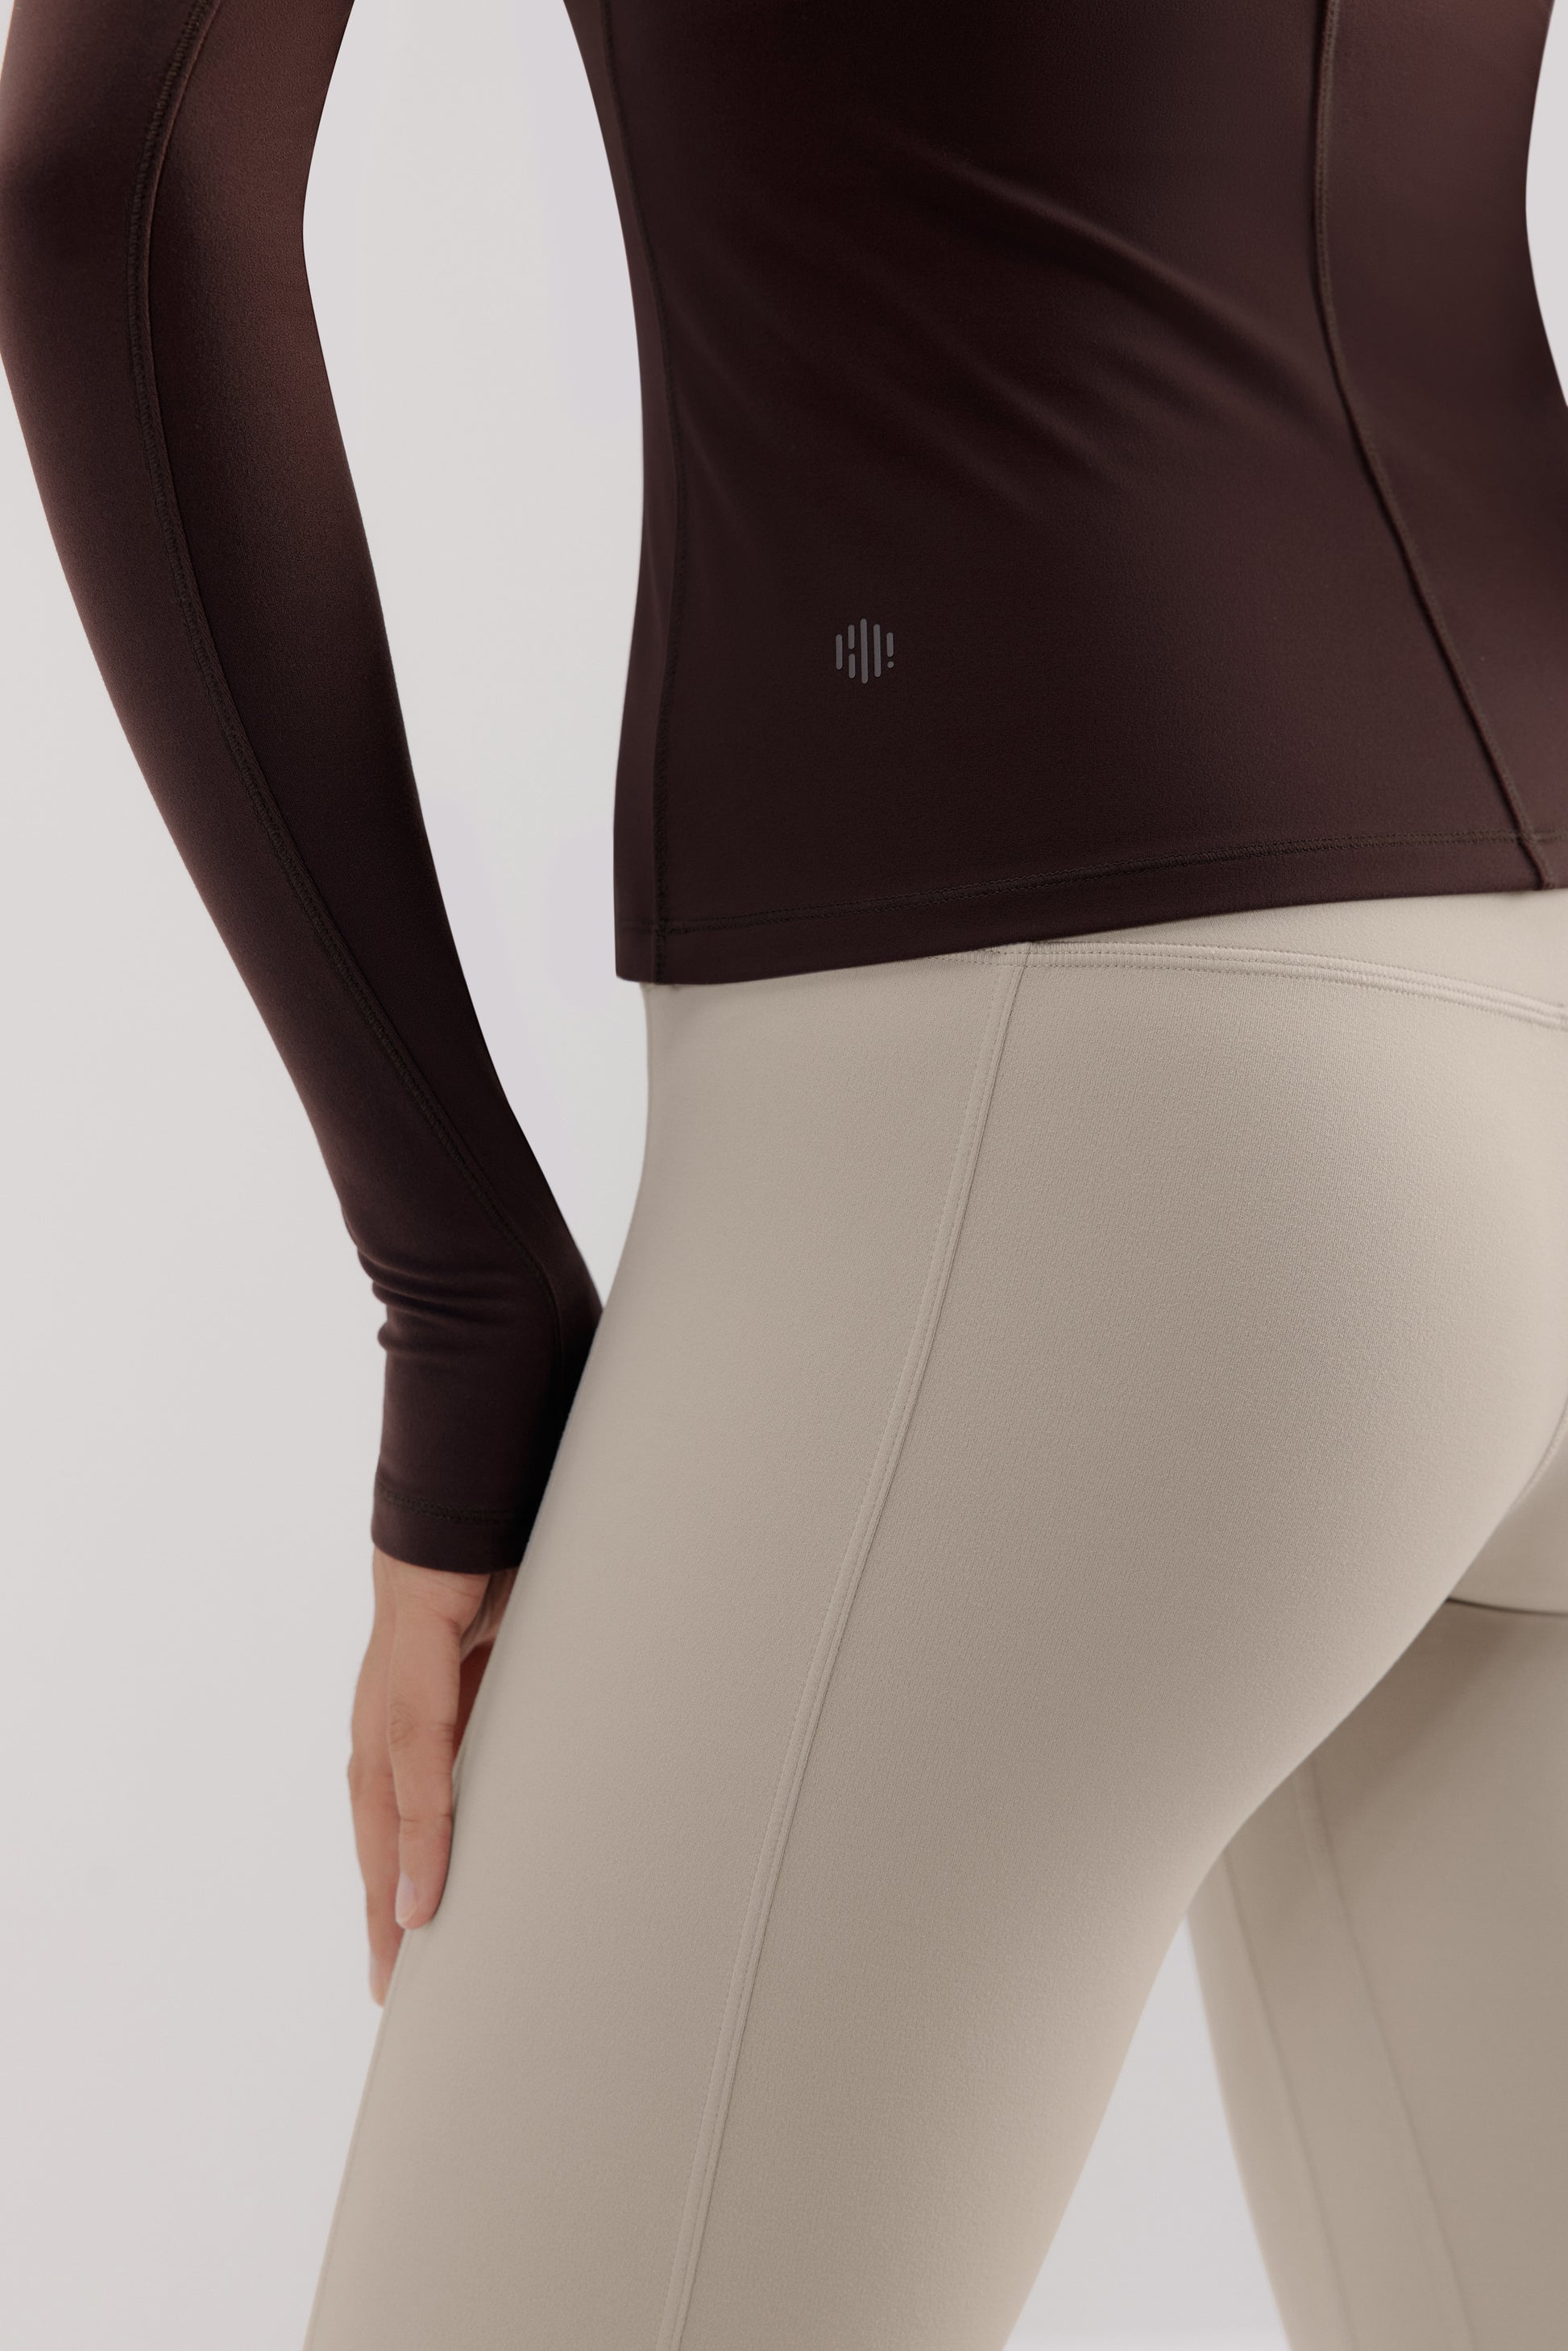 close up of a brown mousse long sleeve sports top and grey leggings